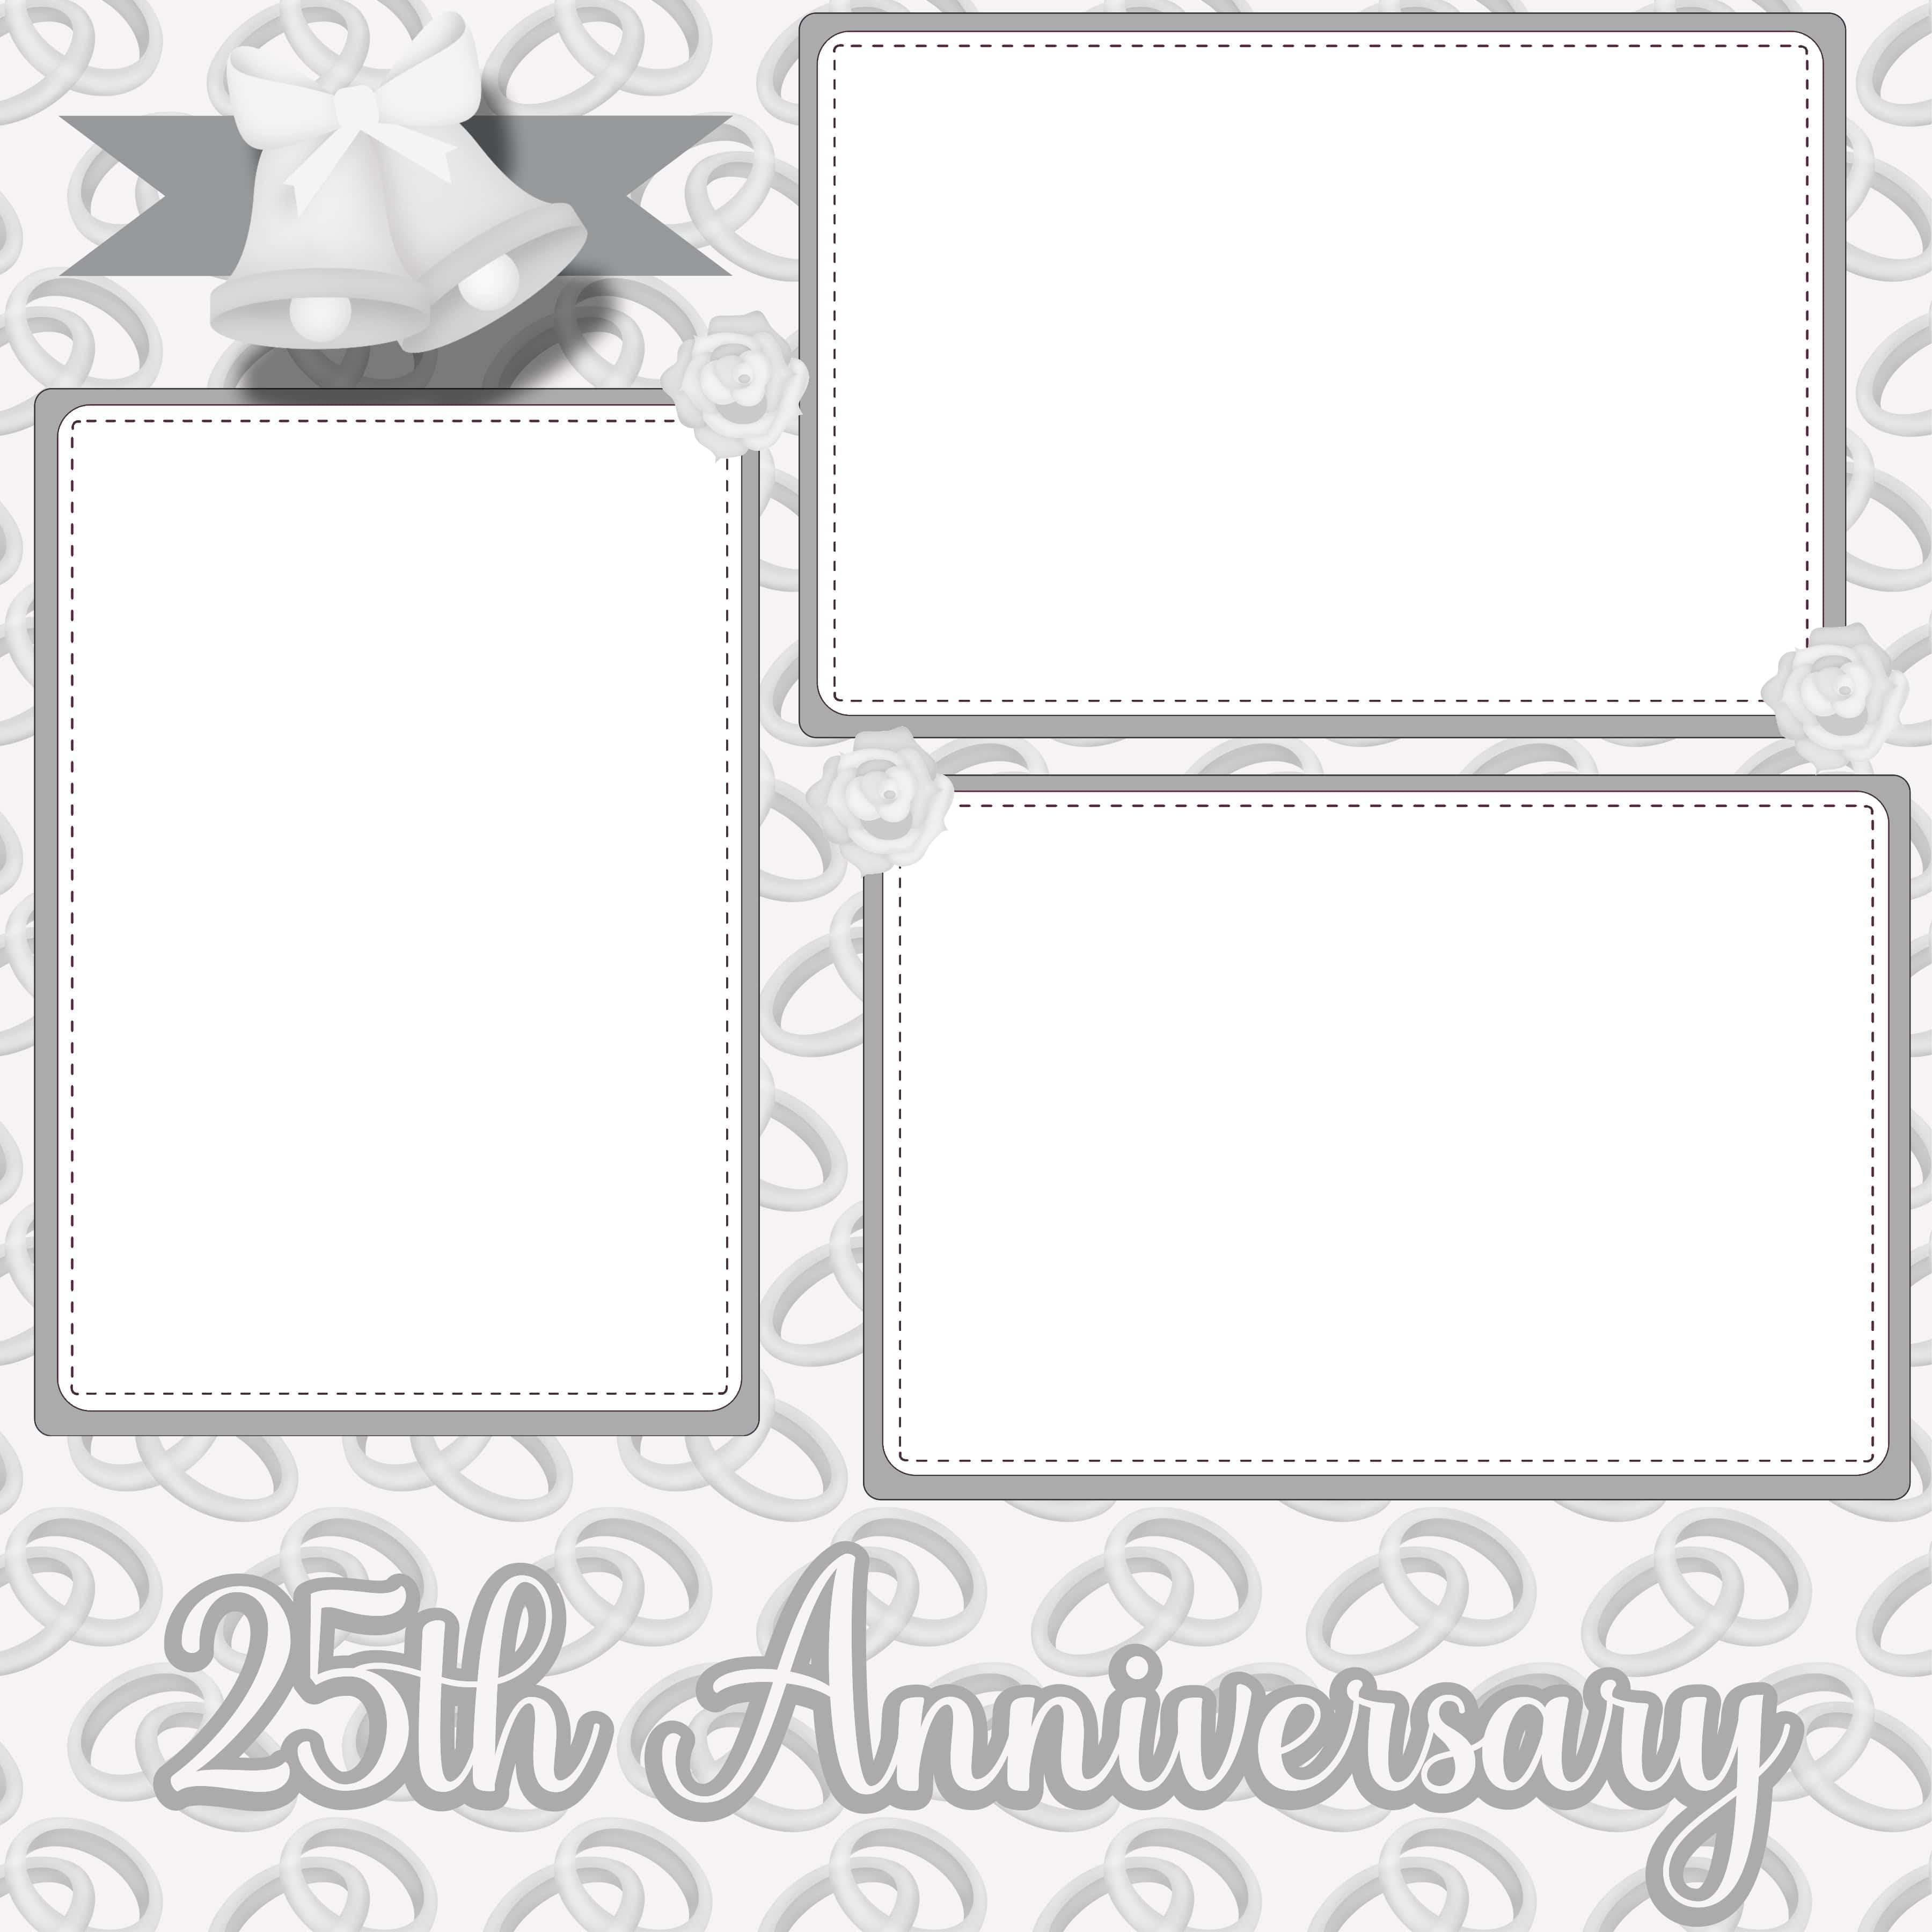 Lasting Love Collection 25th Anniversary (2) - 12 x 12 Premade, Printed Scrapbook Pages by SSC Designs - Scrapbook Supply Companies